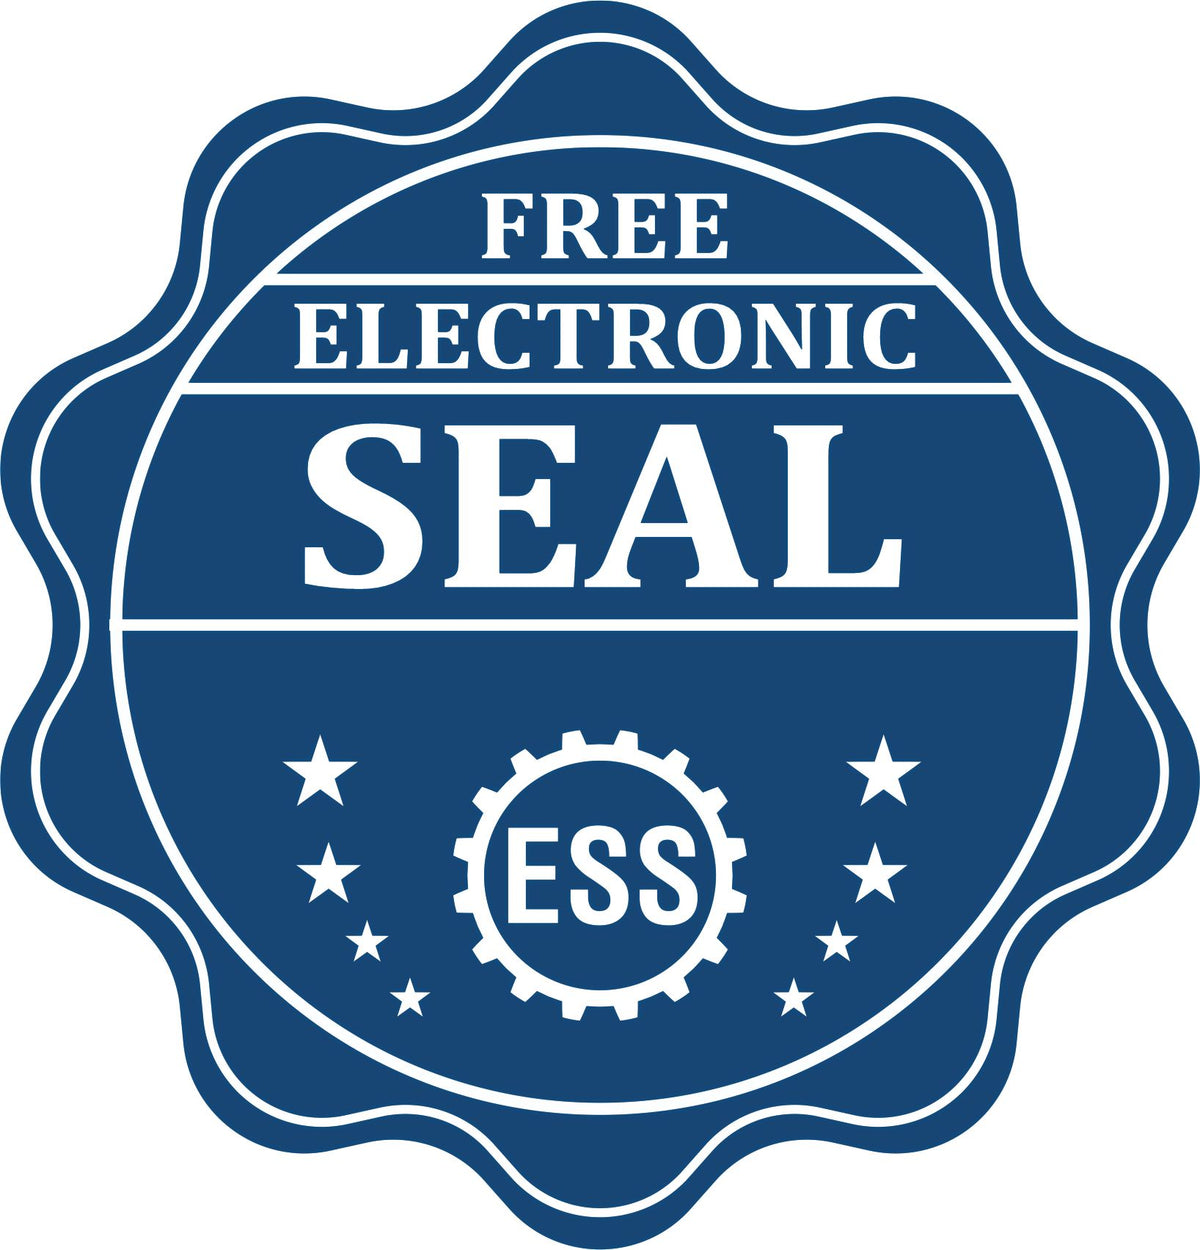 A badge showing a free electronic seal for the Iowa Professional Engineer Seal Stamp with stars and the ESS gear on the emblem.